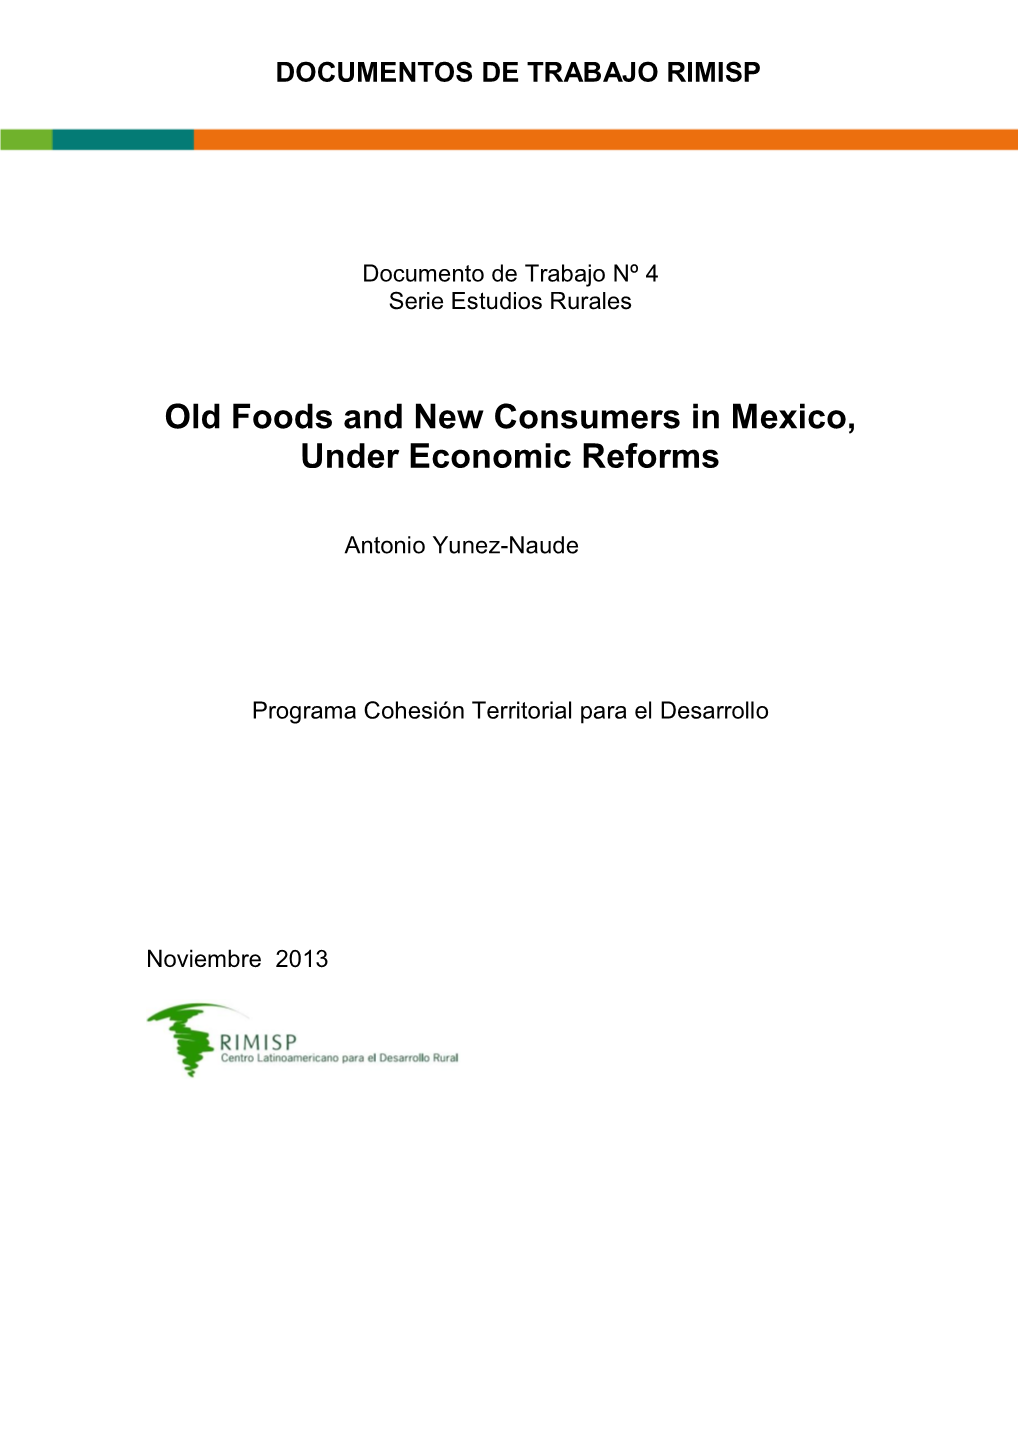 Old Foods and New Consumers in Mexico, Under Economic Reforms